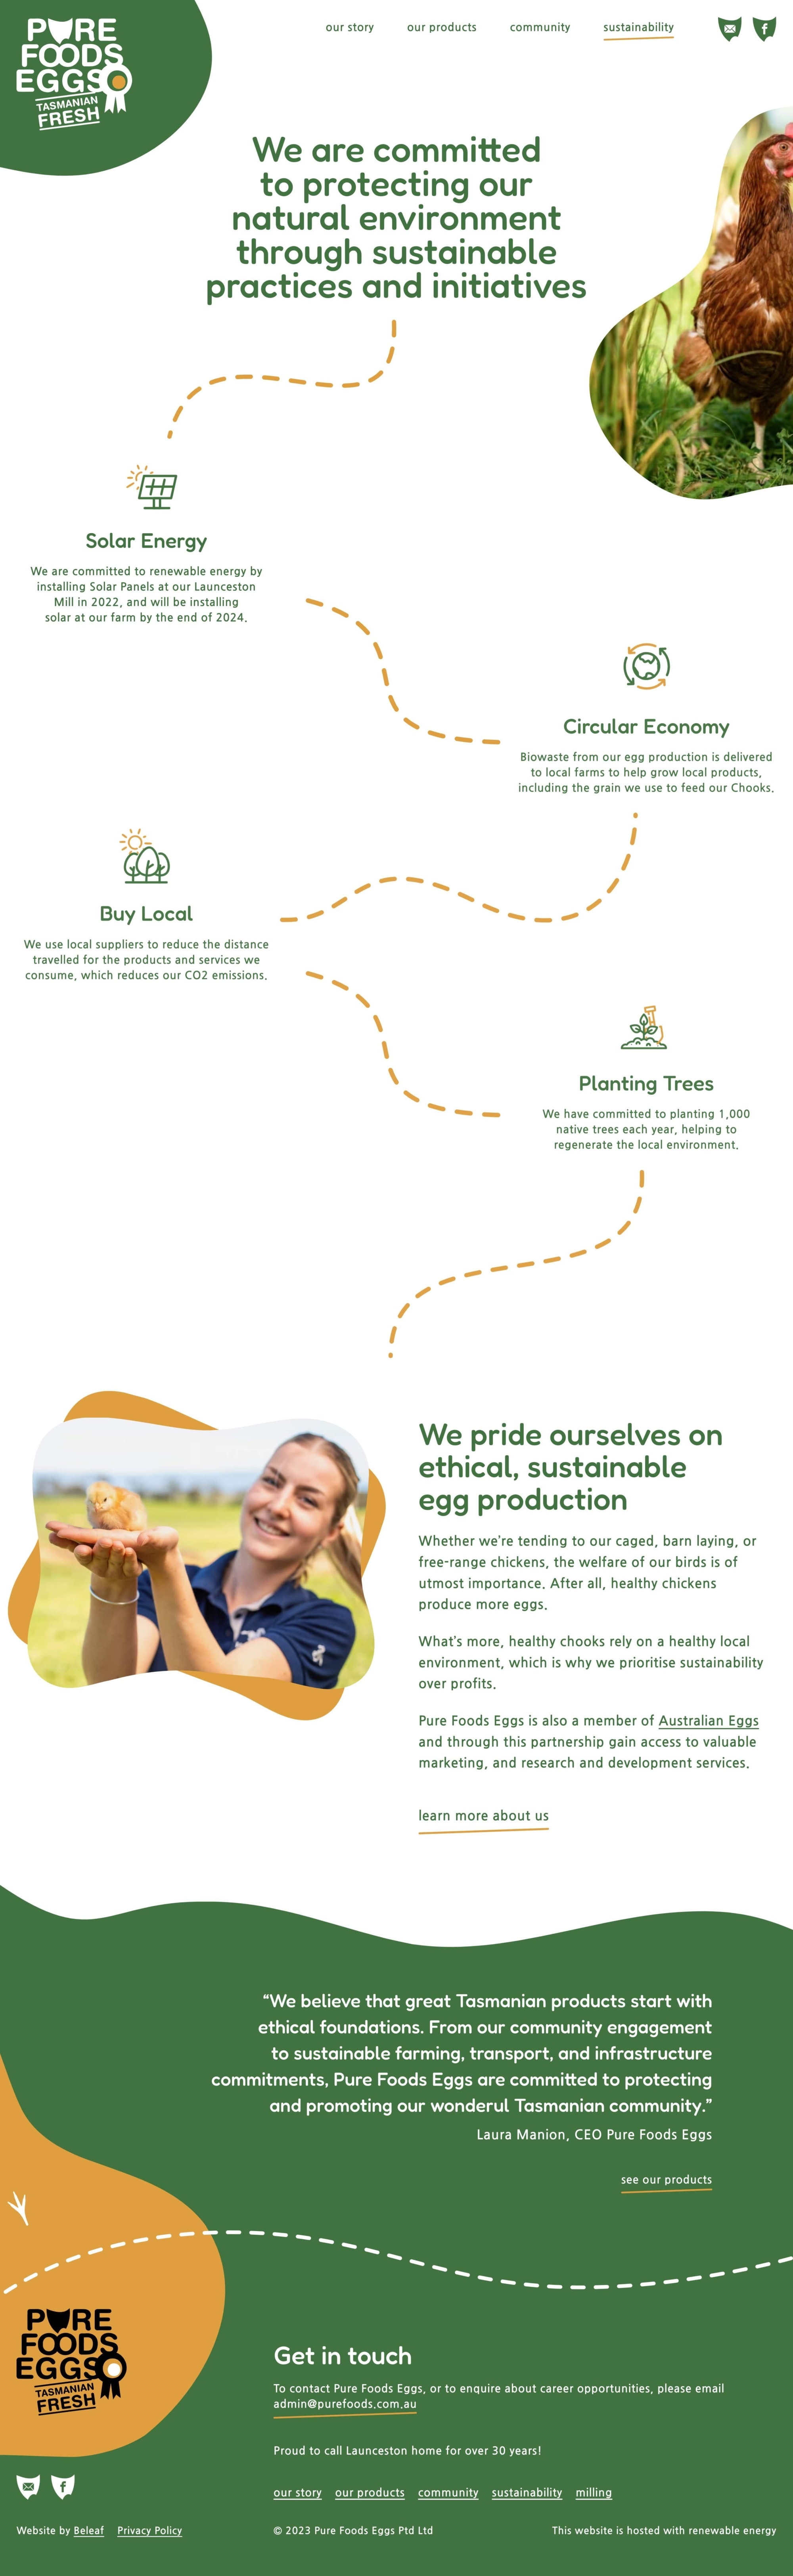 Pure Foods Eggs Sustainability Page